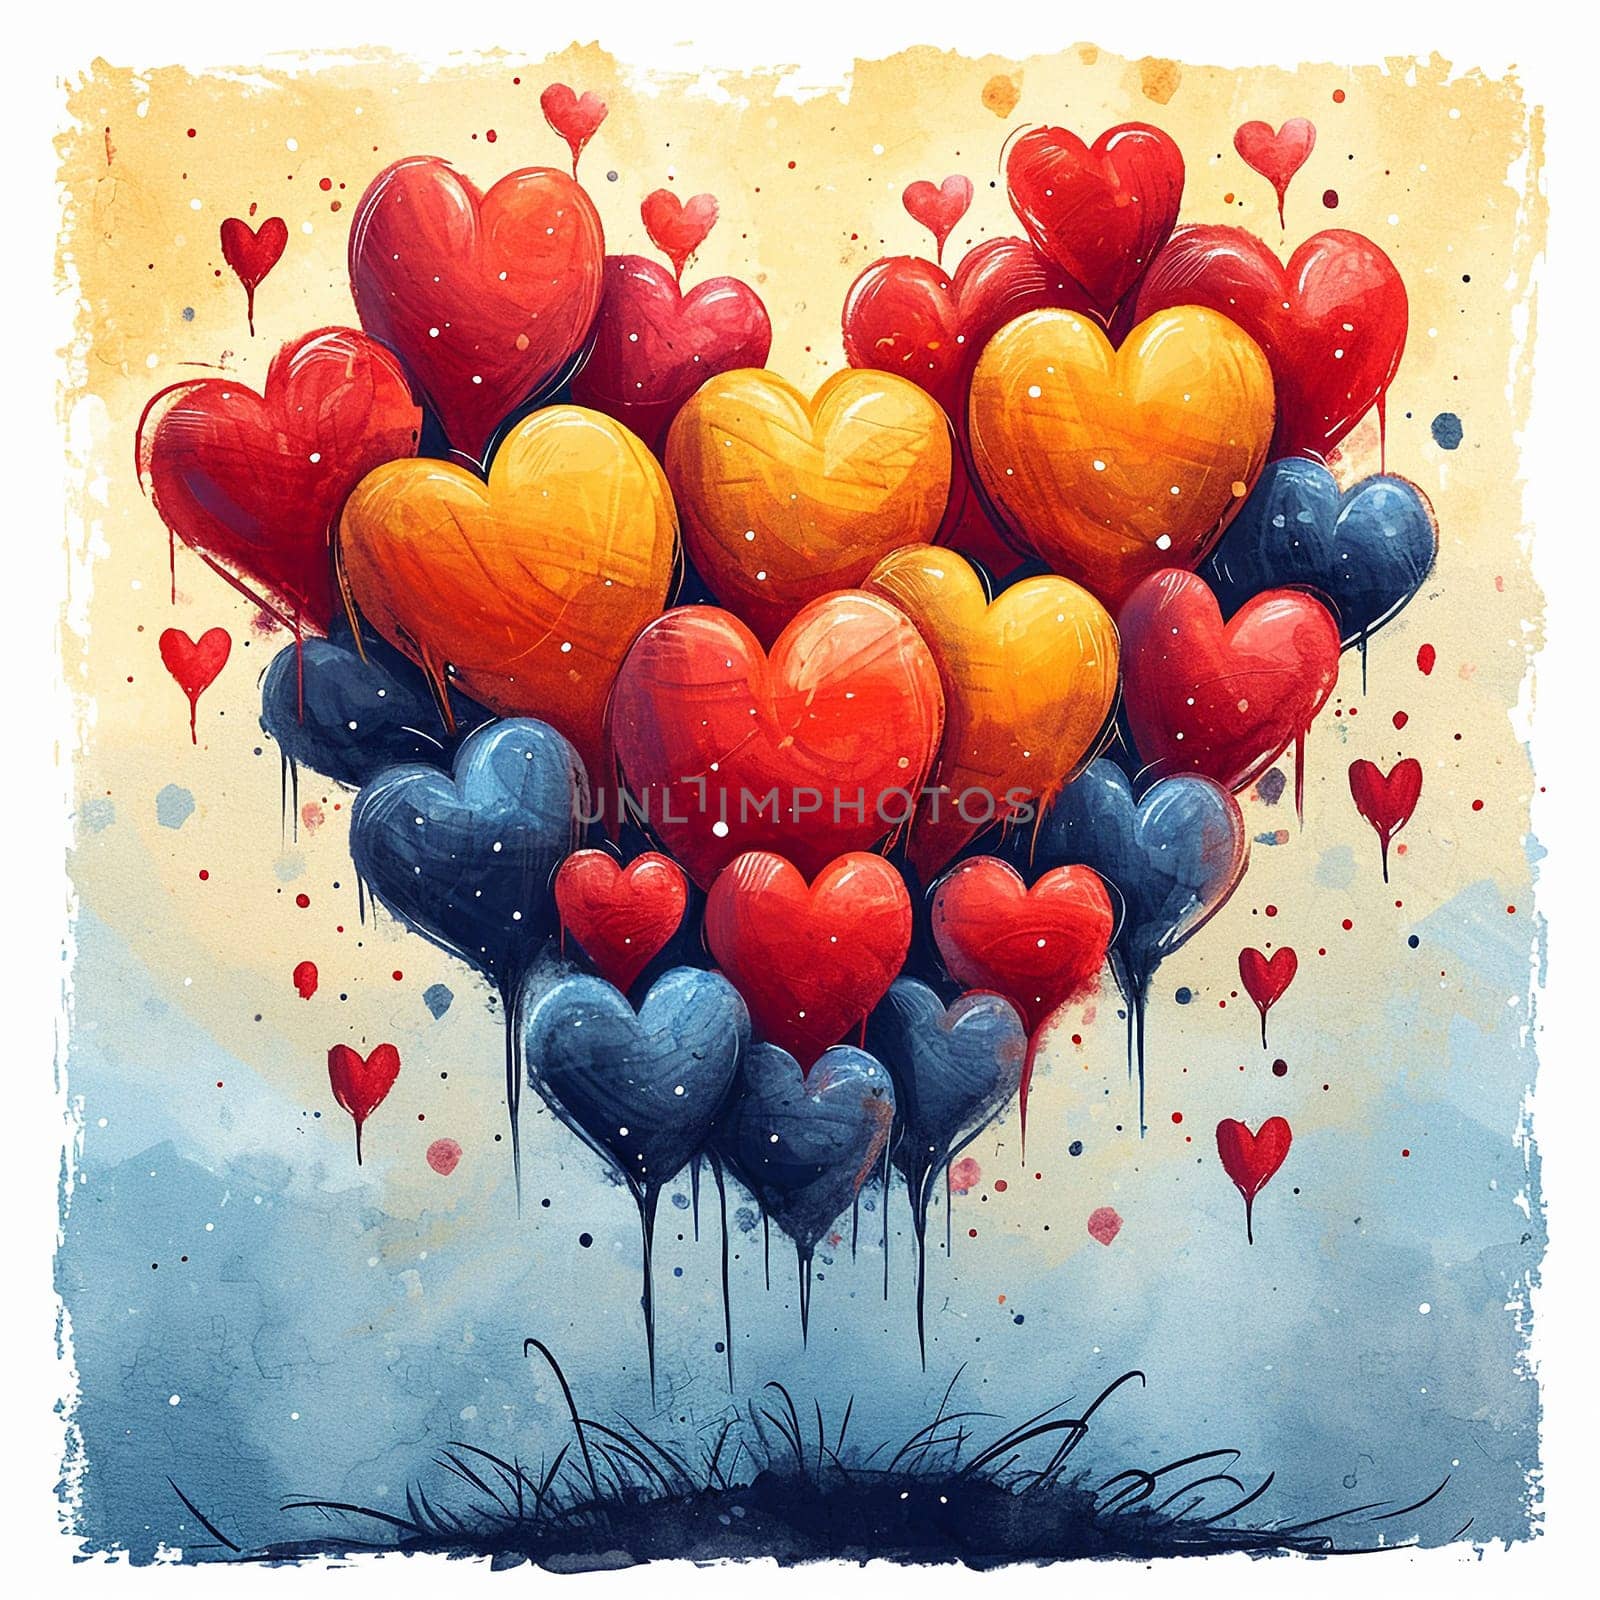 Colorful hearts pattern. Valentine's Day background. High quality photo